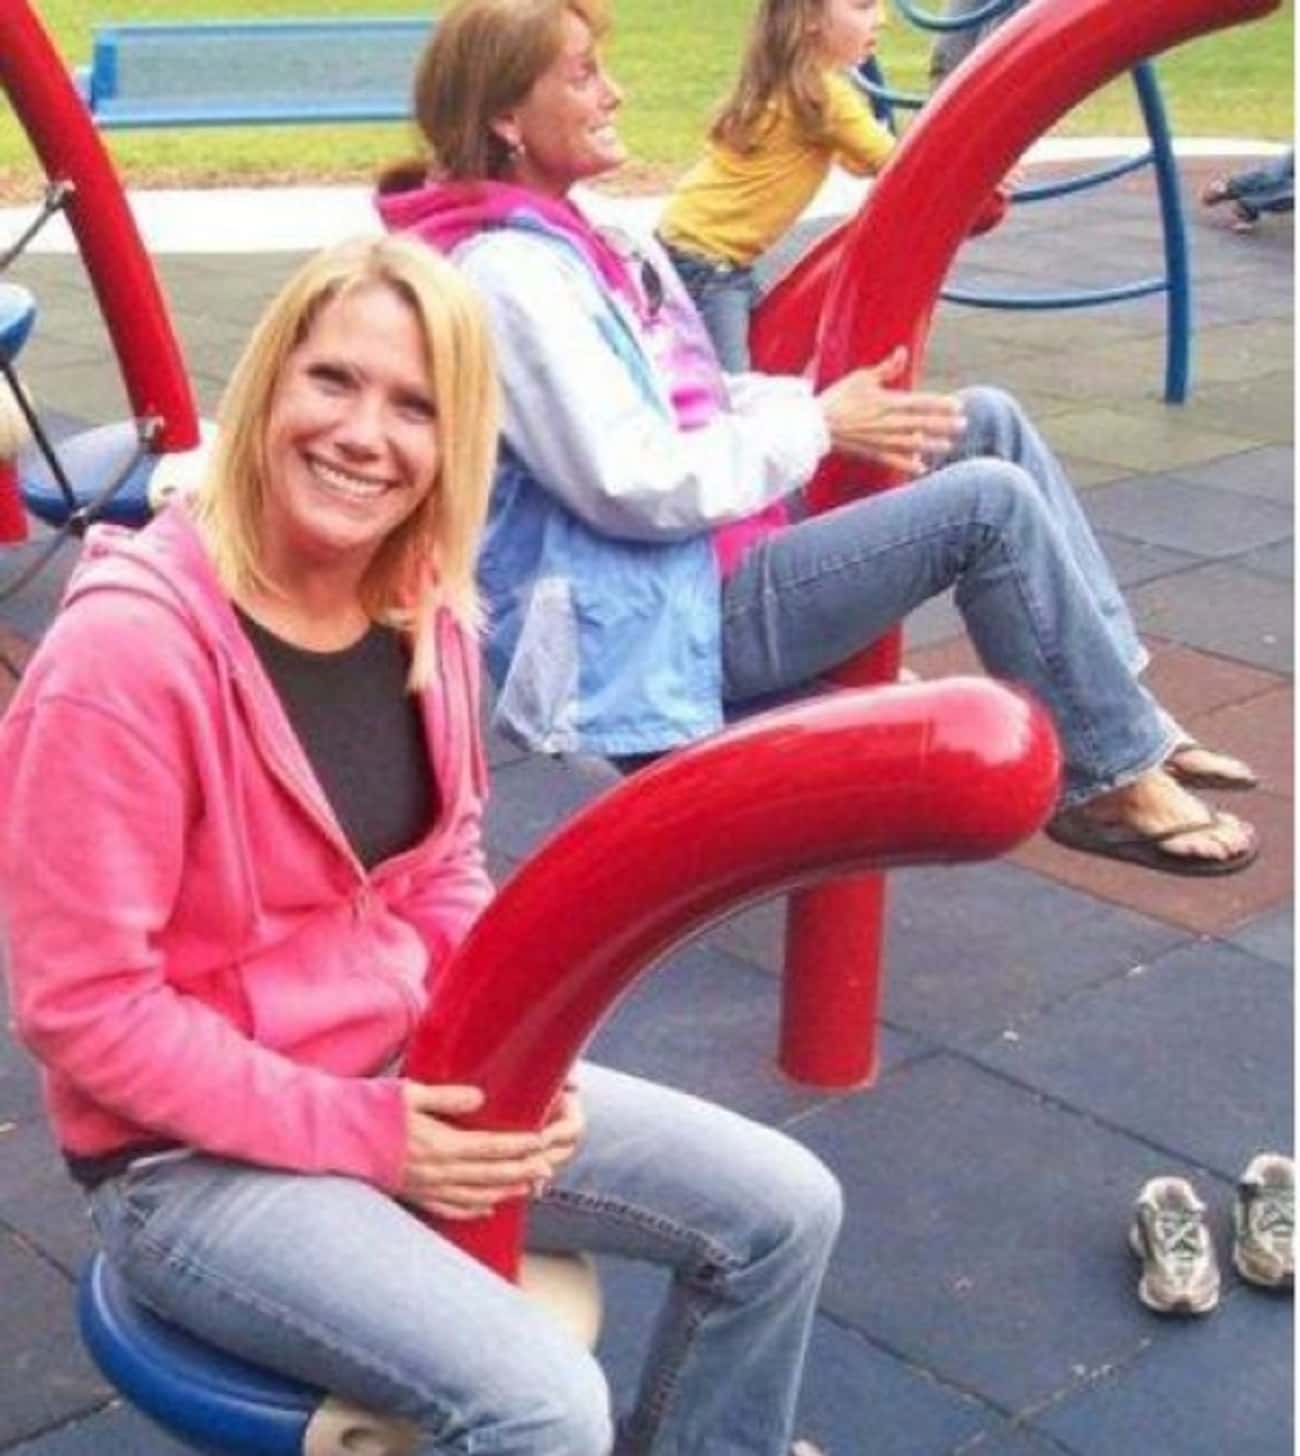 These Fun Seats That Attract More Moms Than Kids